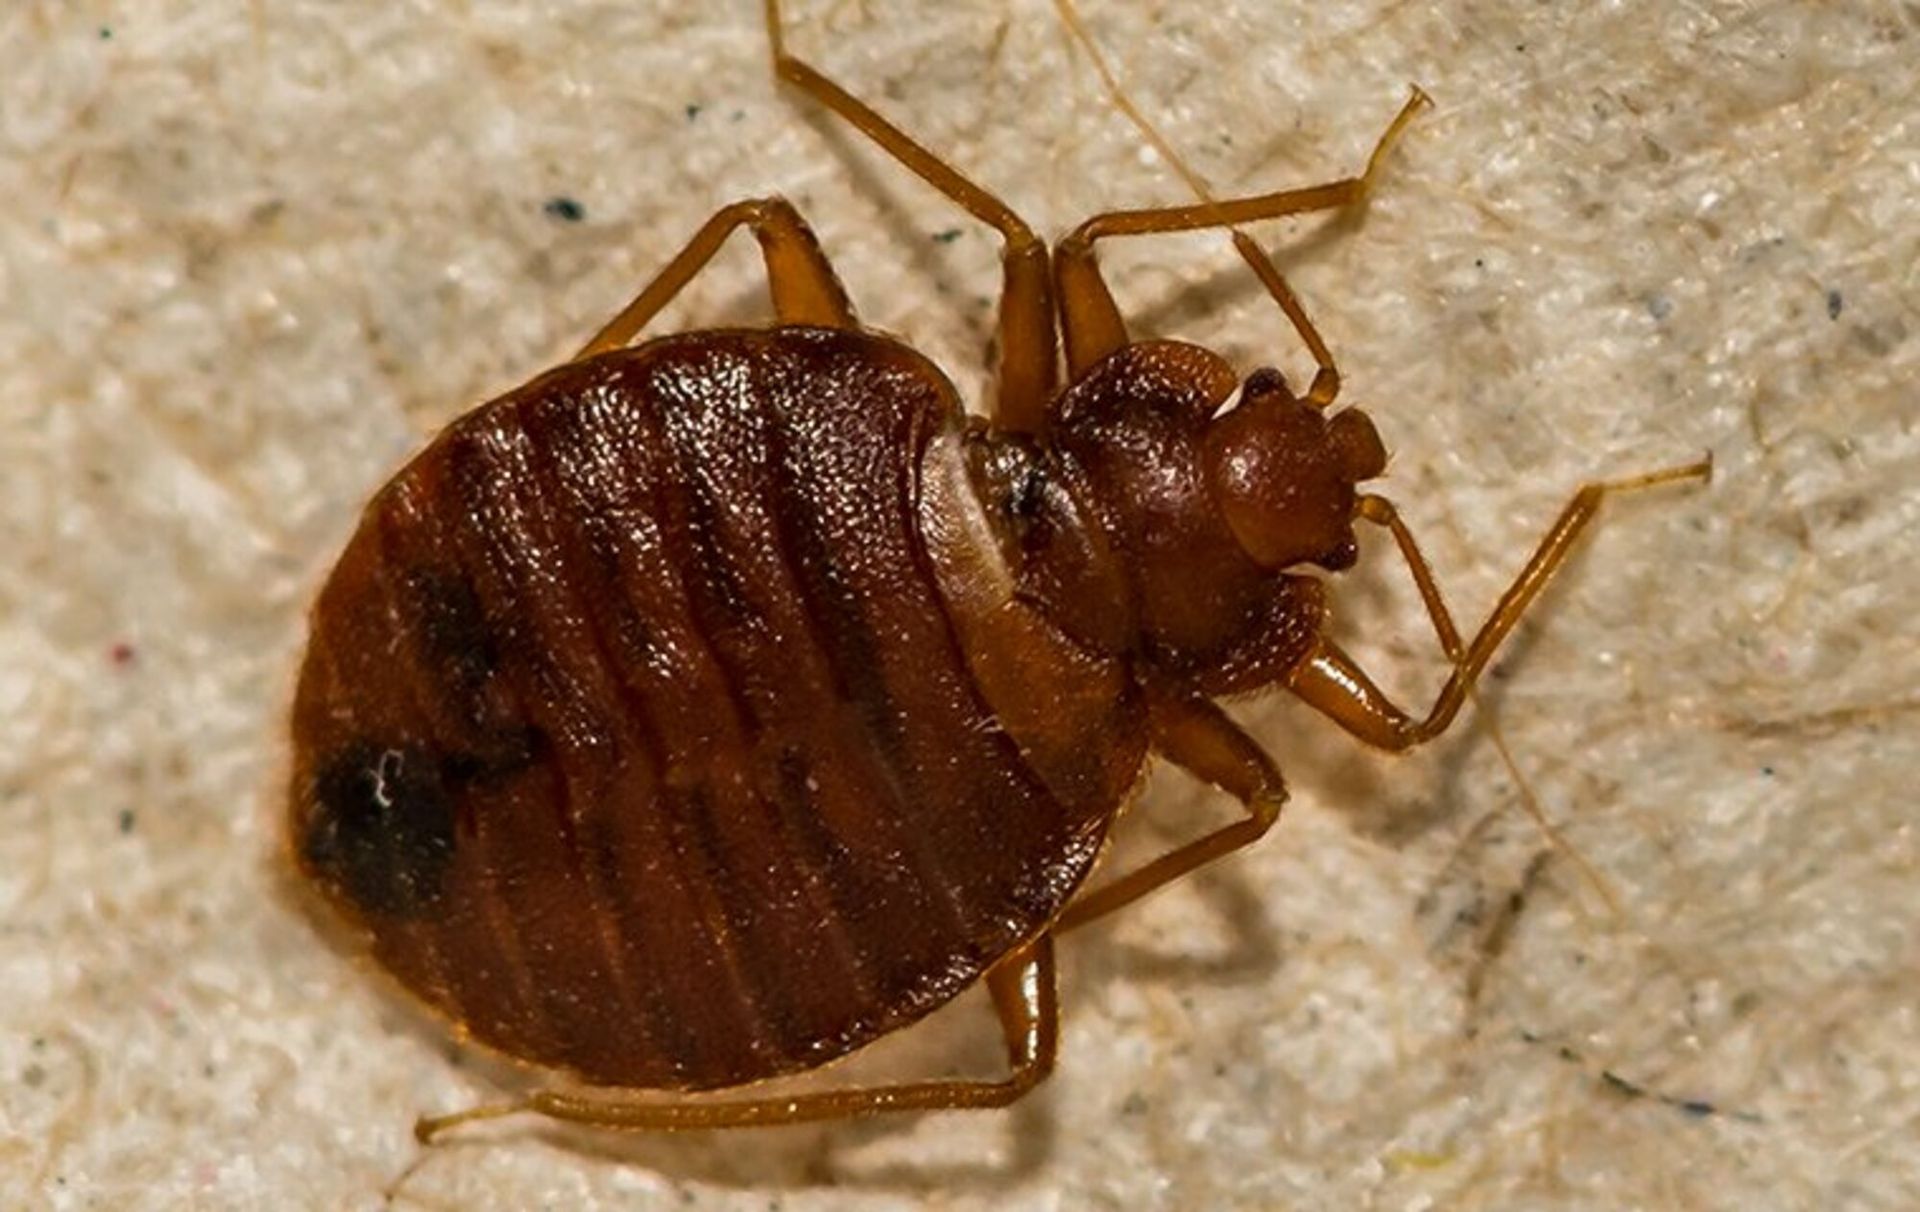 Bed bug in wooden surface